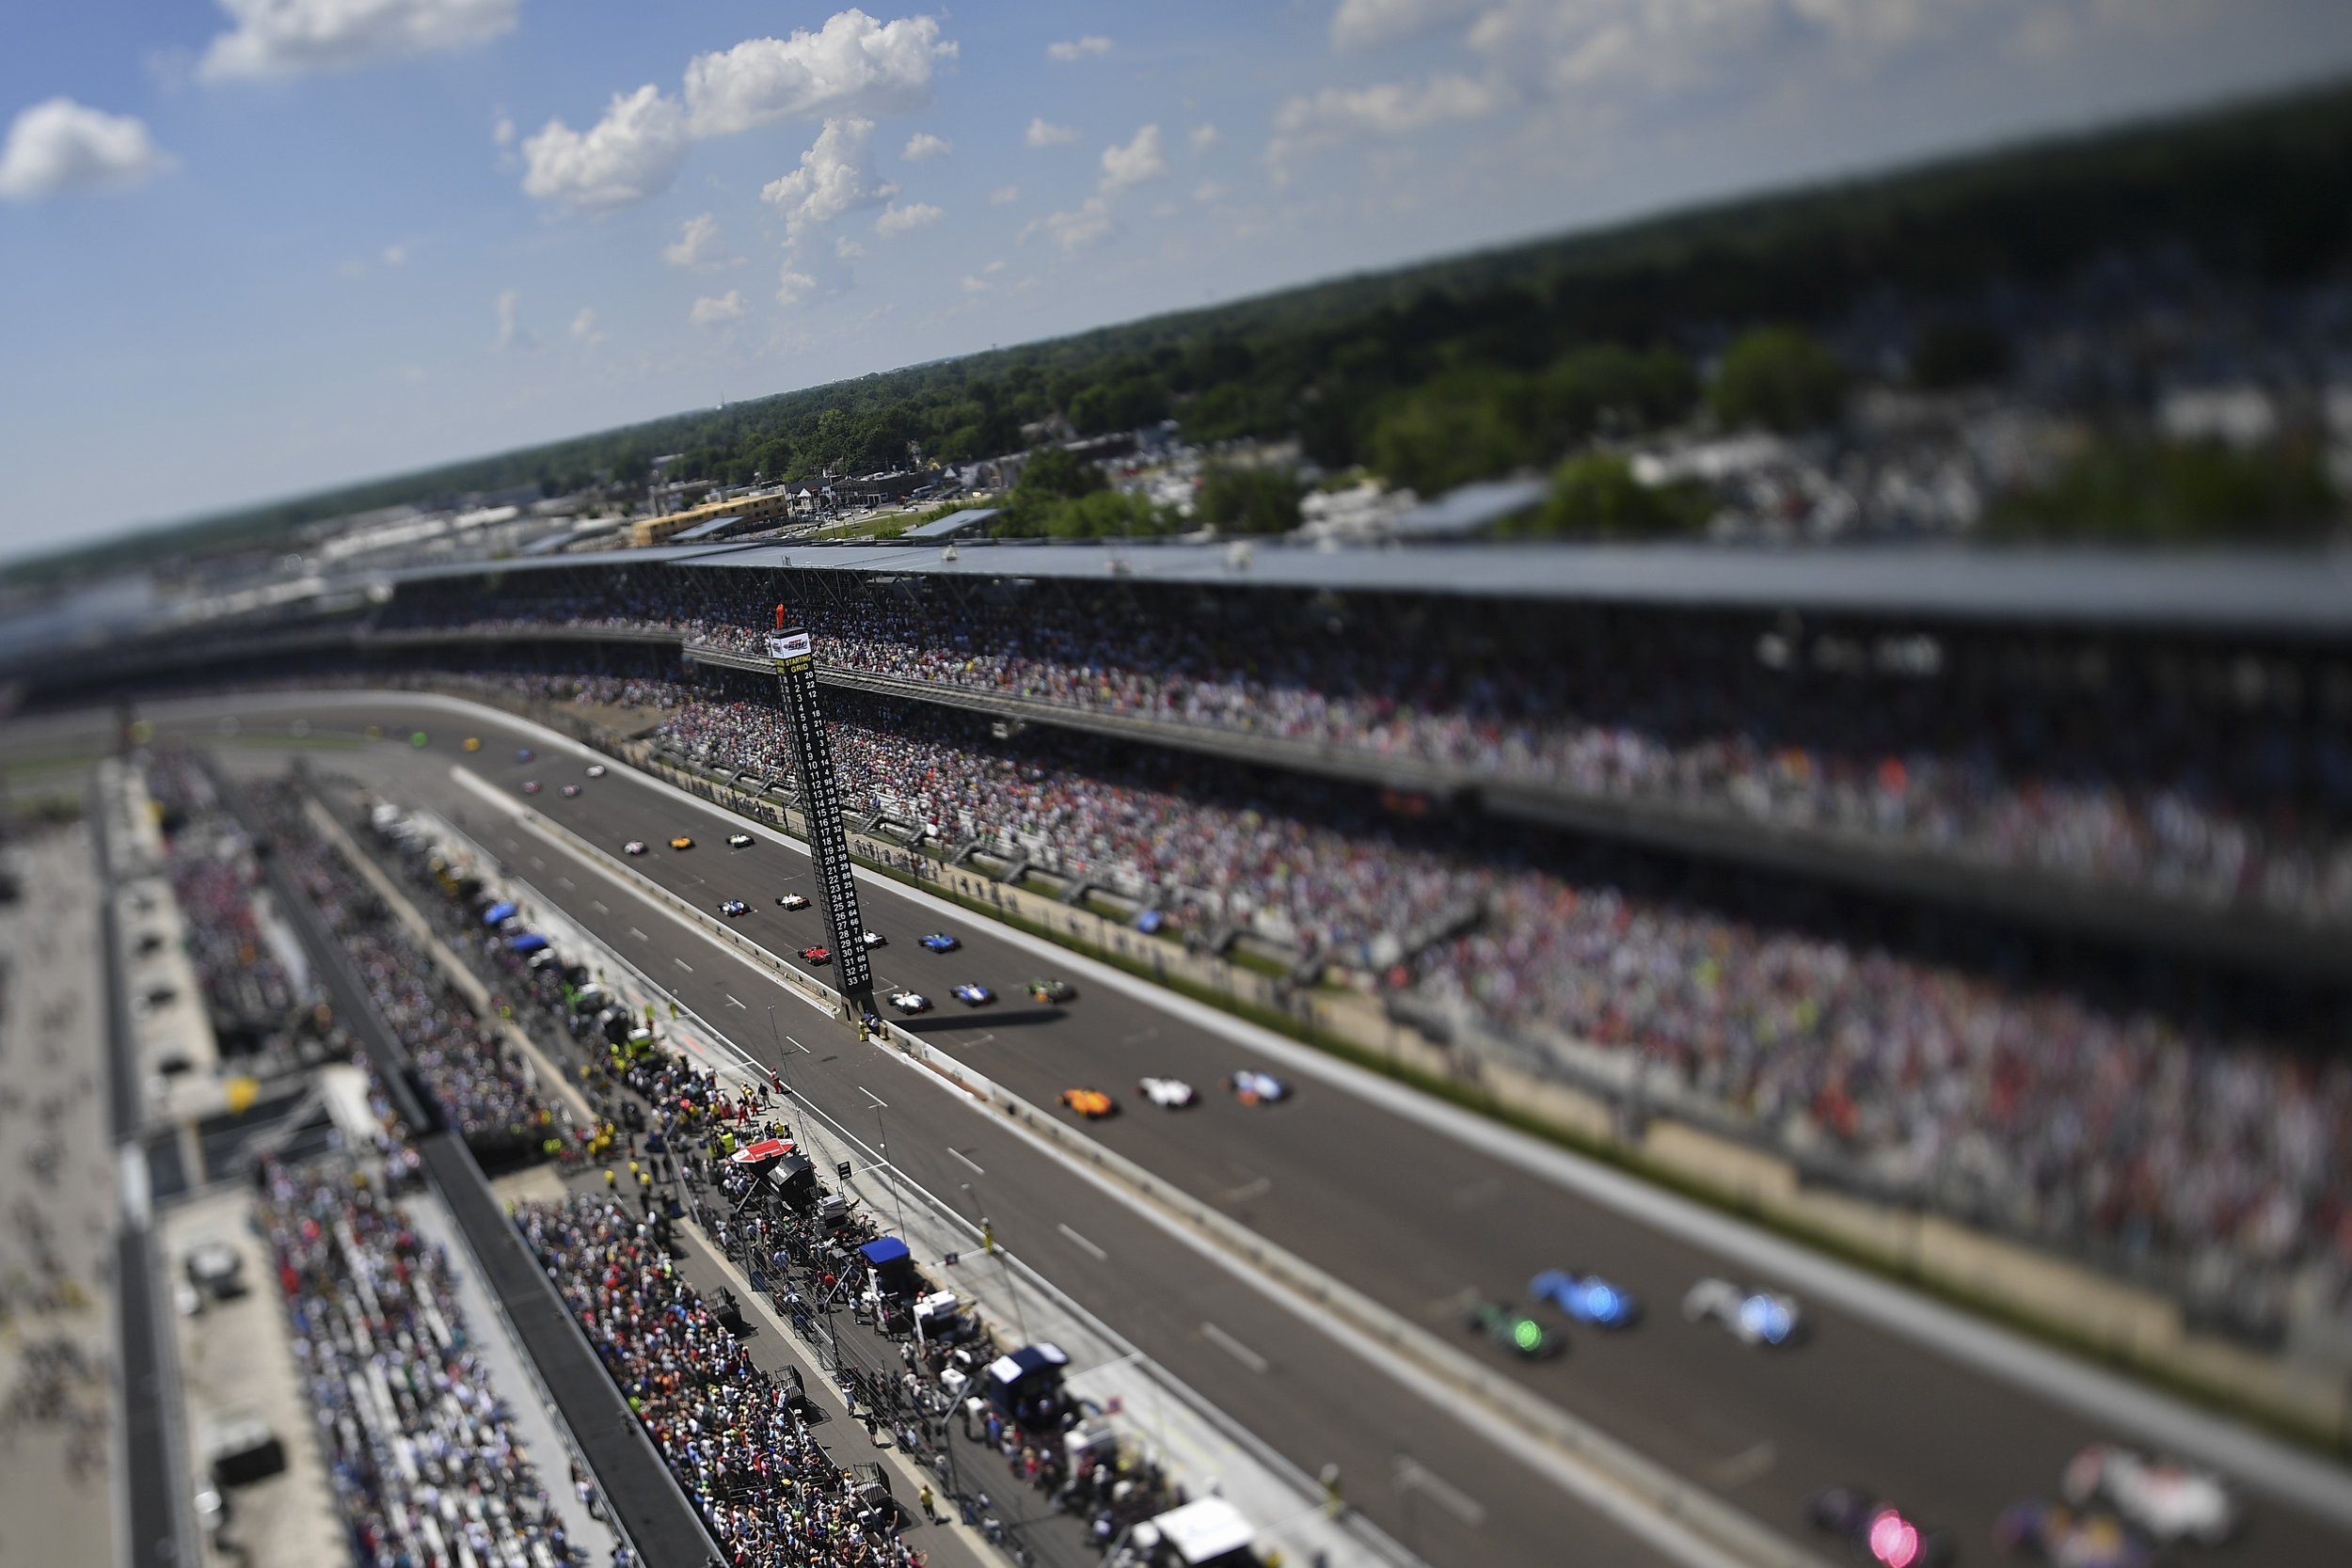  I wanted to do something different for the start of this year’s Indy 500. Our staff has all bases covered, inside and outside turn 1,2,3 and 4. Why not the roof? The tilt-shift specialty lens gives a creative almost toy look to the shot.     